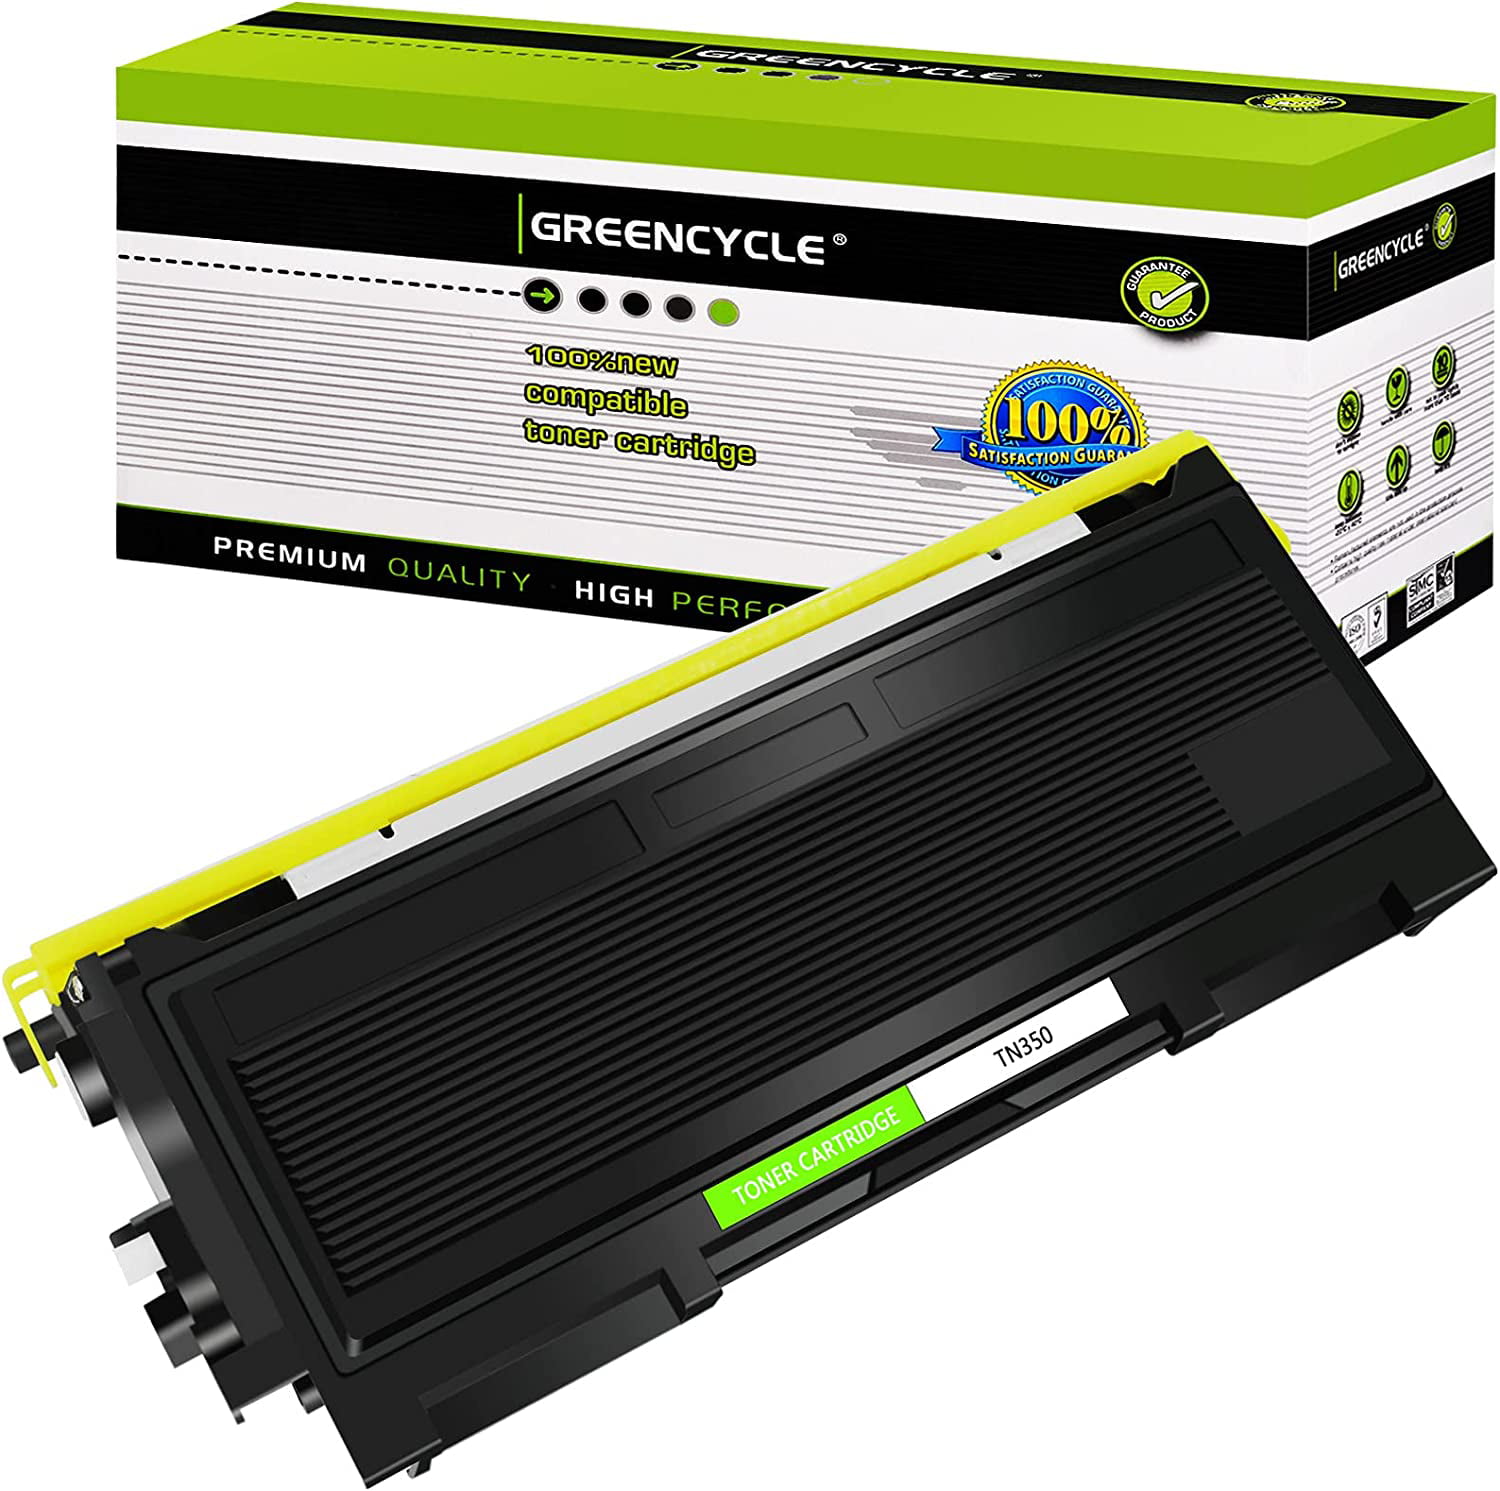 1 Pack TN350 TN-350 Black Toner Cartridge Replacement Compatible for Brother MFC-7420 DCP-7020 - Walmart.com